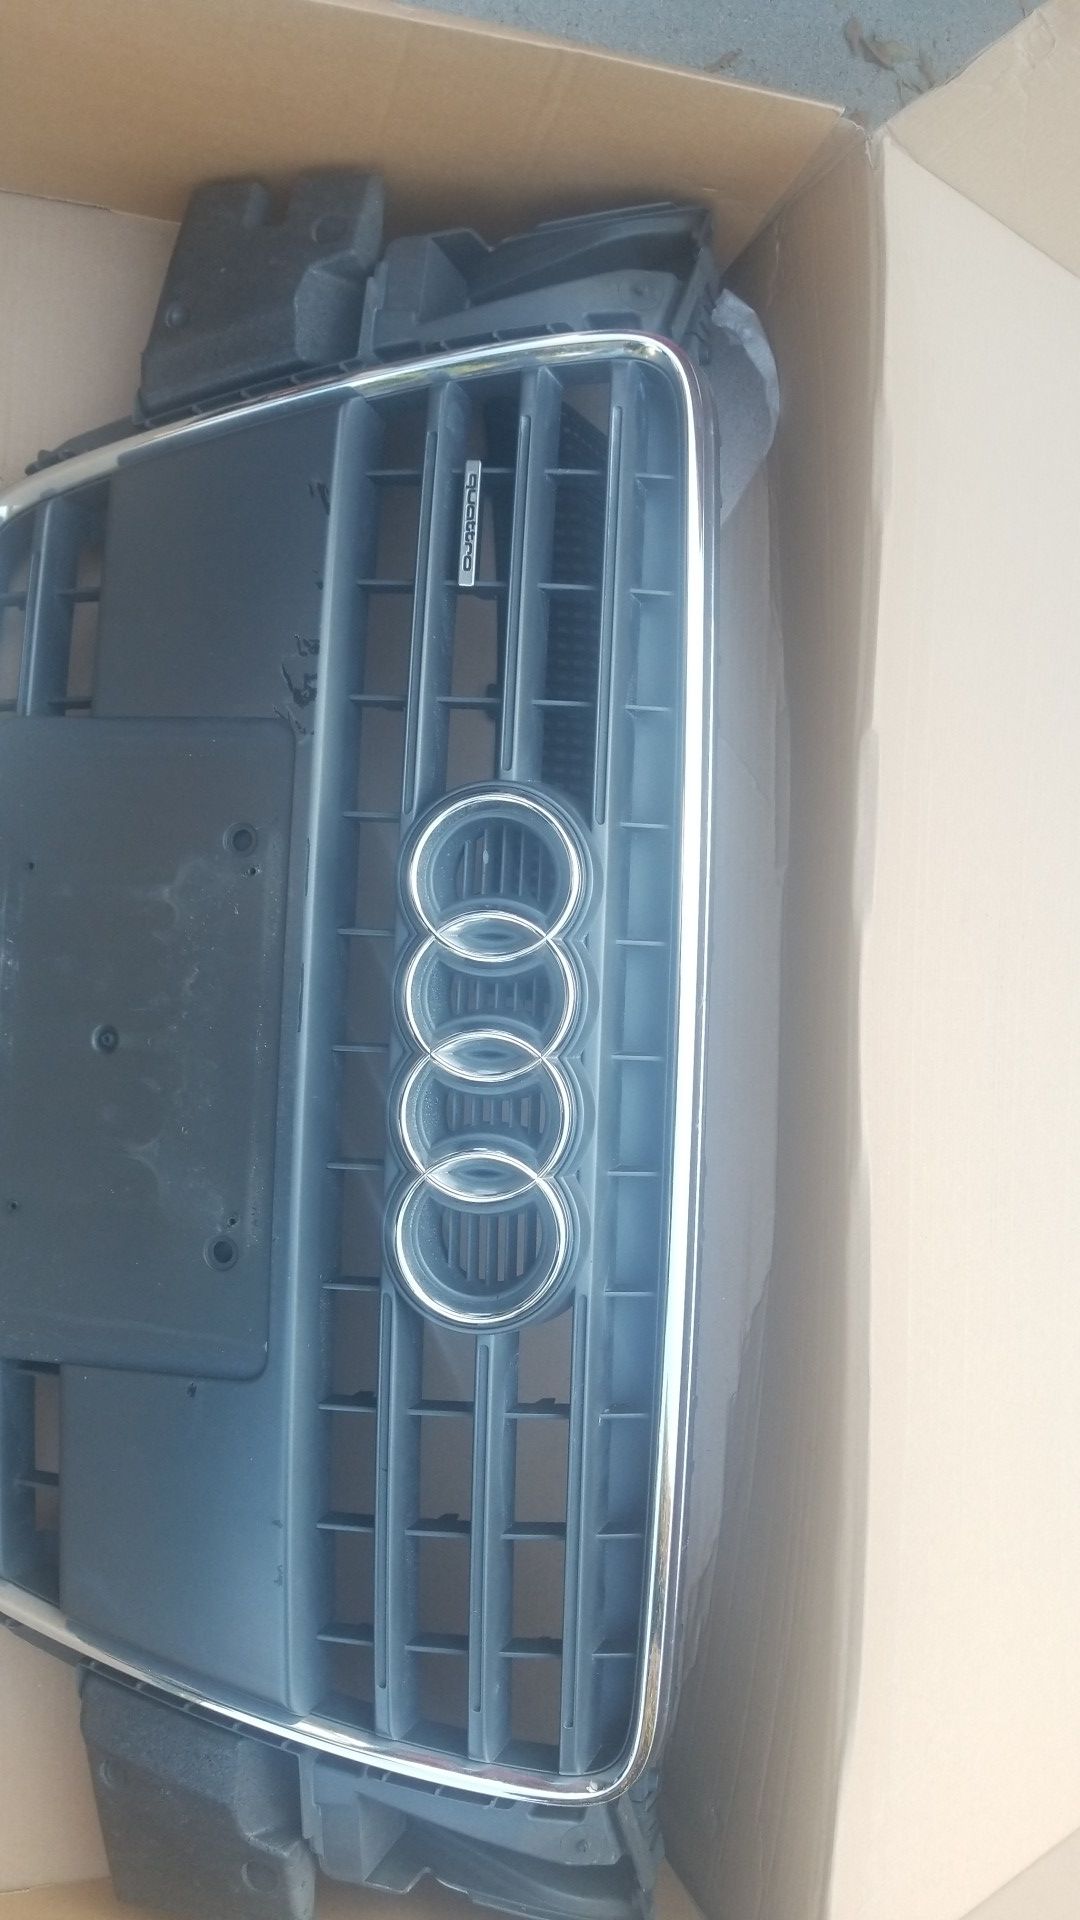 Audi quattro grill part# 8TO-853-651-E-1QP part number is furnished so you can make sure it fits your vehicle and you decide to purchase. No refunds.